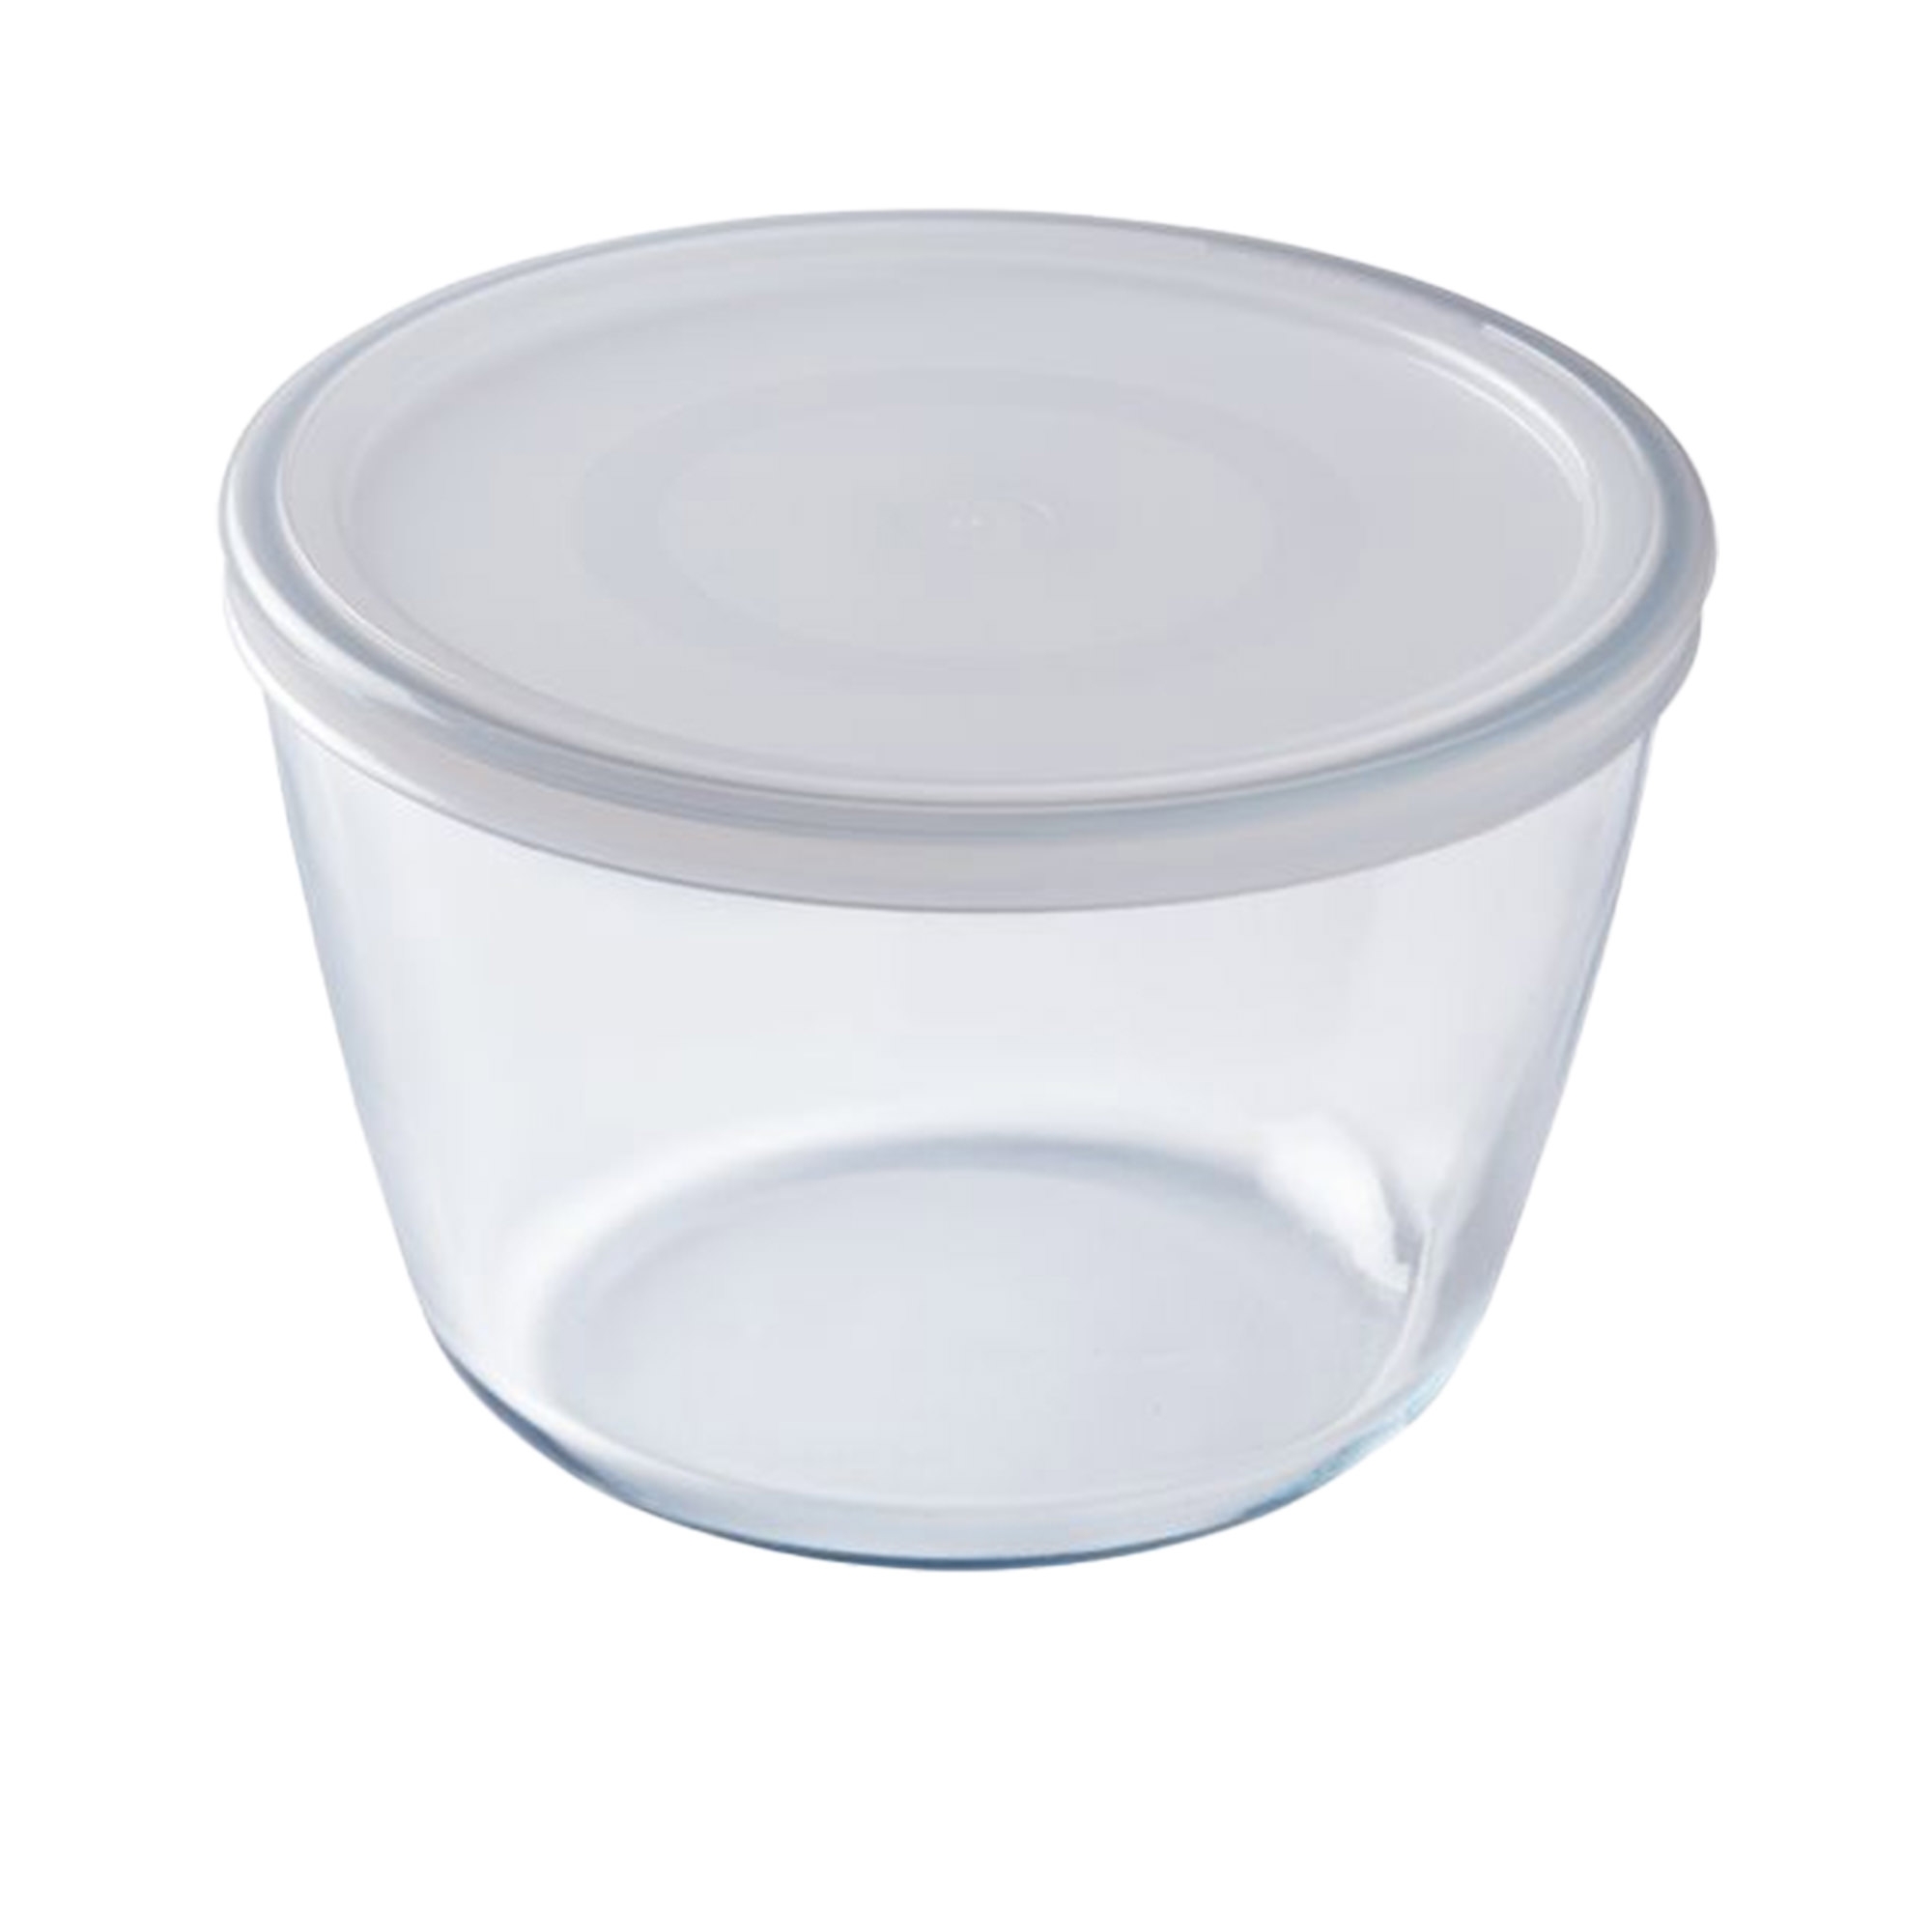 O' Cuisine Round Glass Food Storage Container 1.6L Image 1